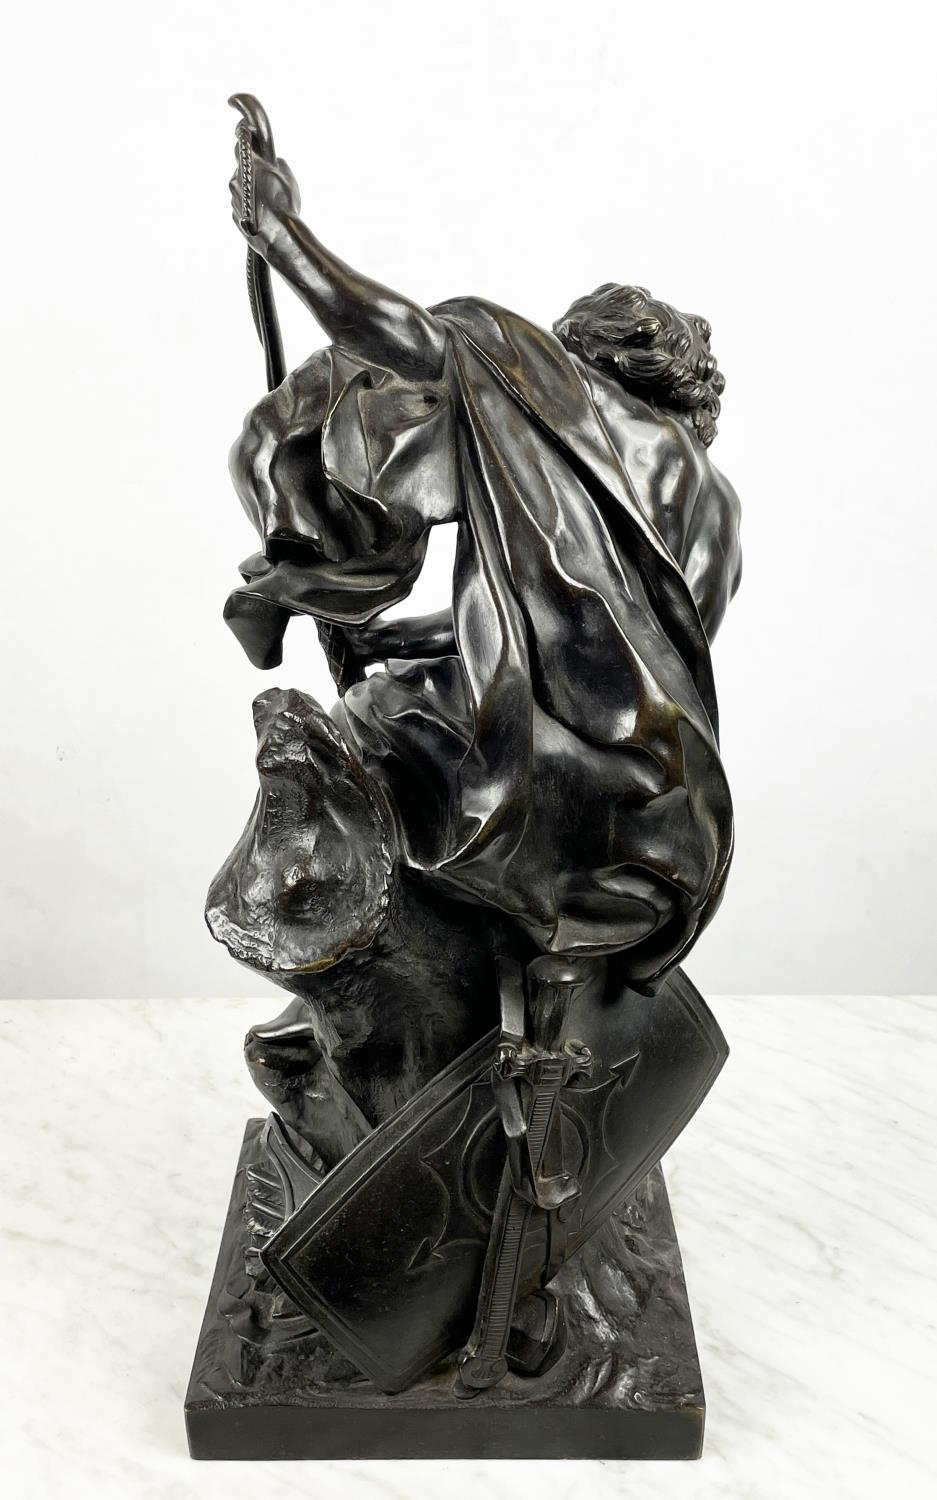 JACQUES BOUSSEAU, French (1681-1740) Ulysse stringing his bow, late 19th century bronze, 48cm H. - Image 3 of 6